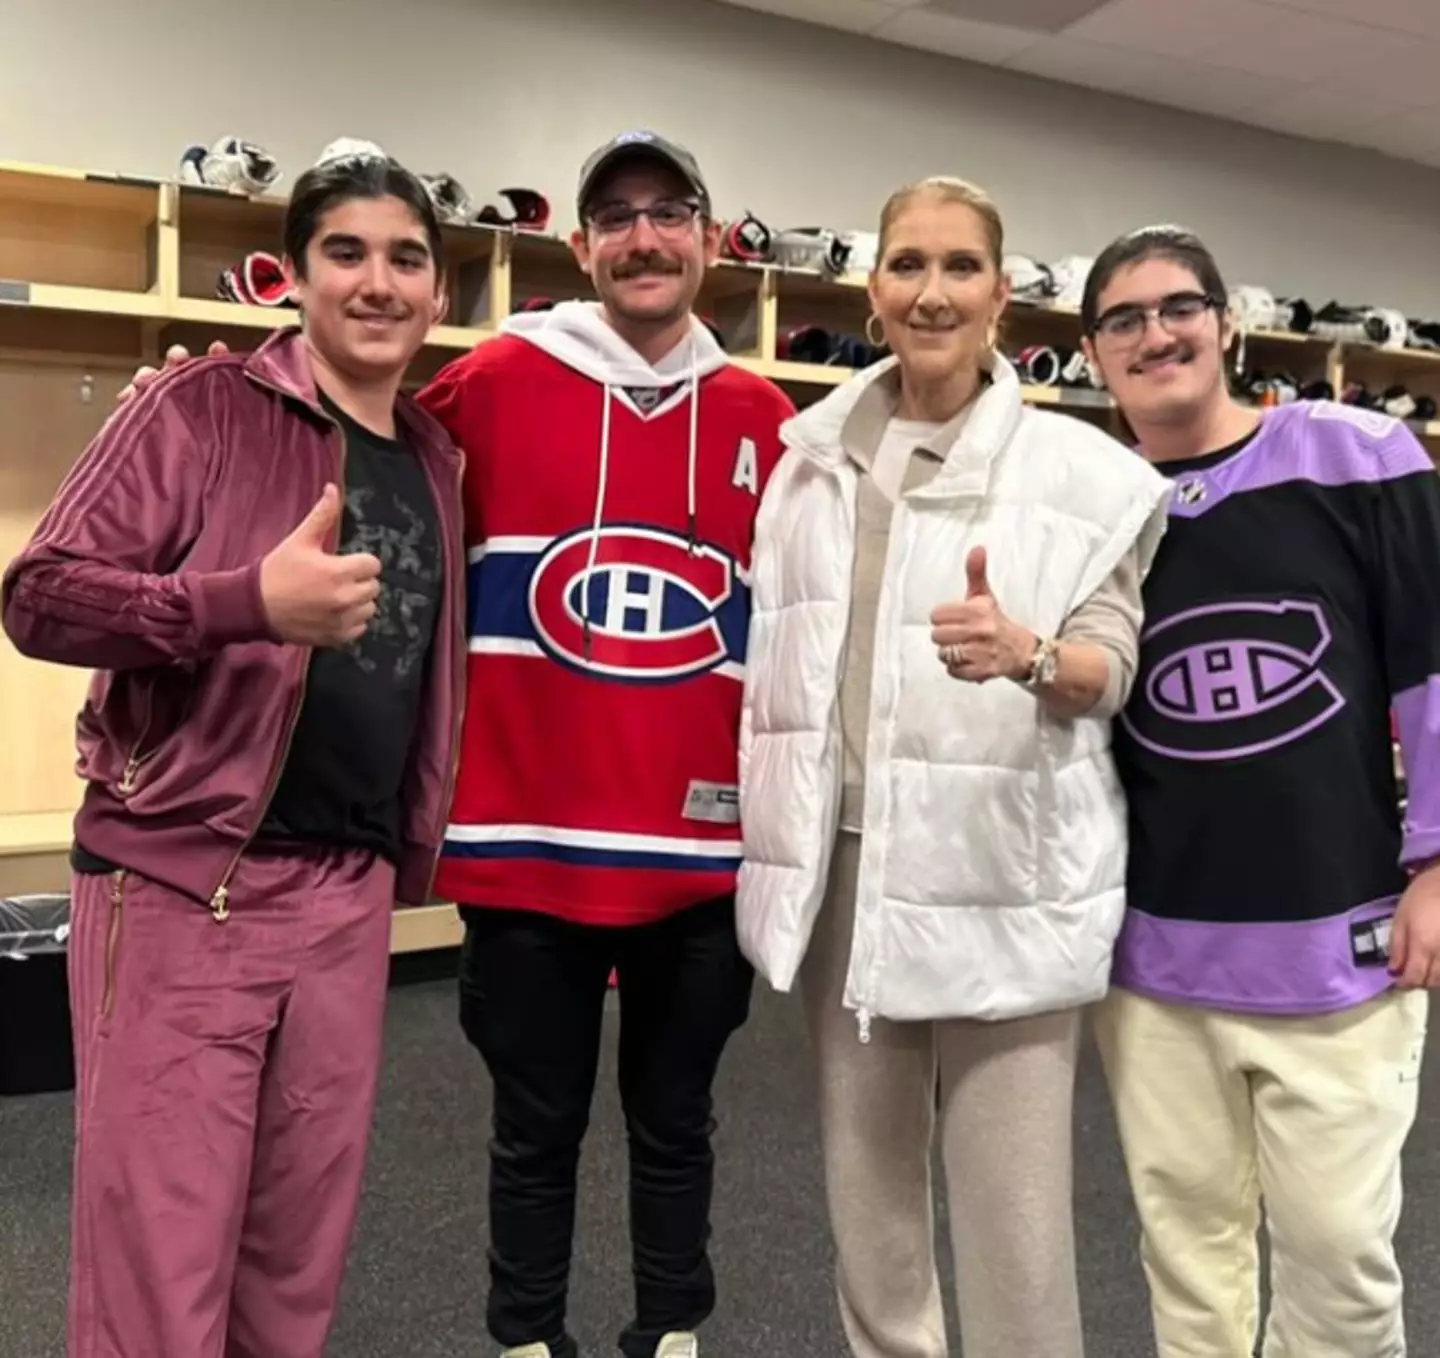 Celine's first public outing was when she recently visited the Montreal Canadiens.